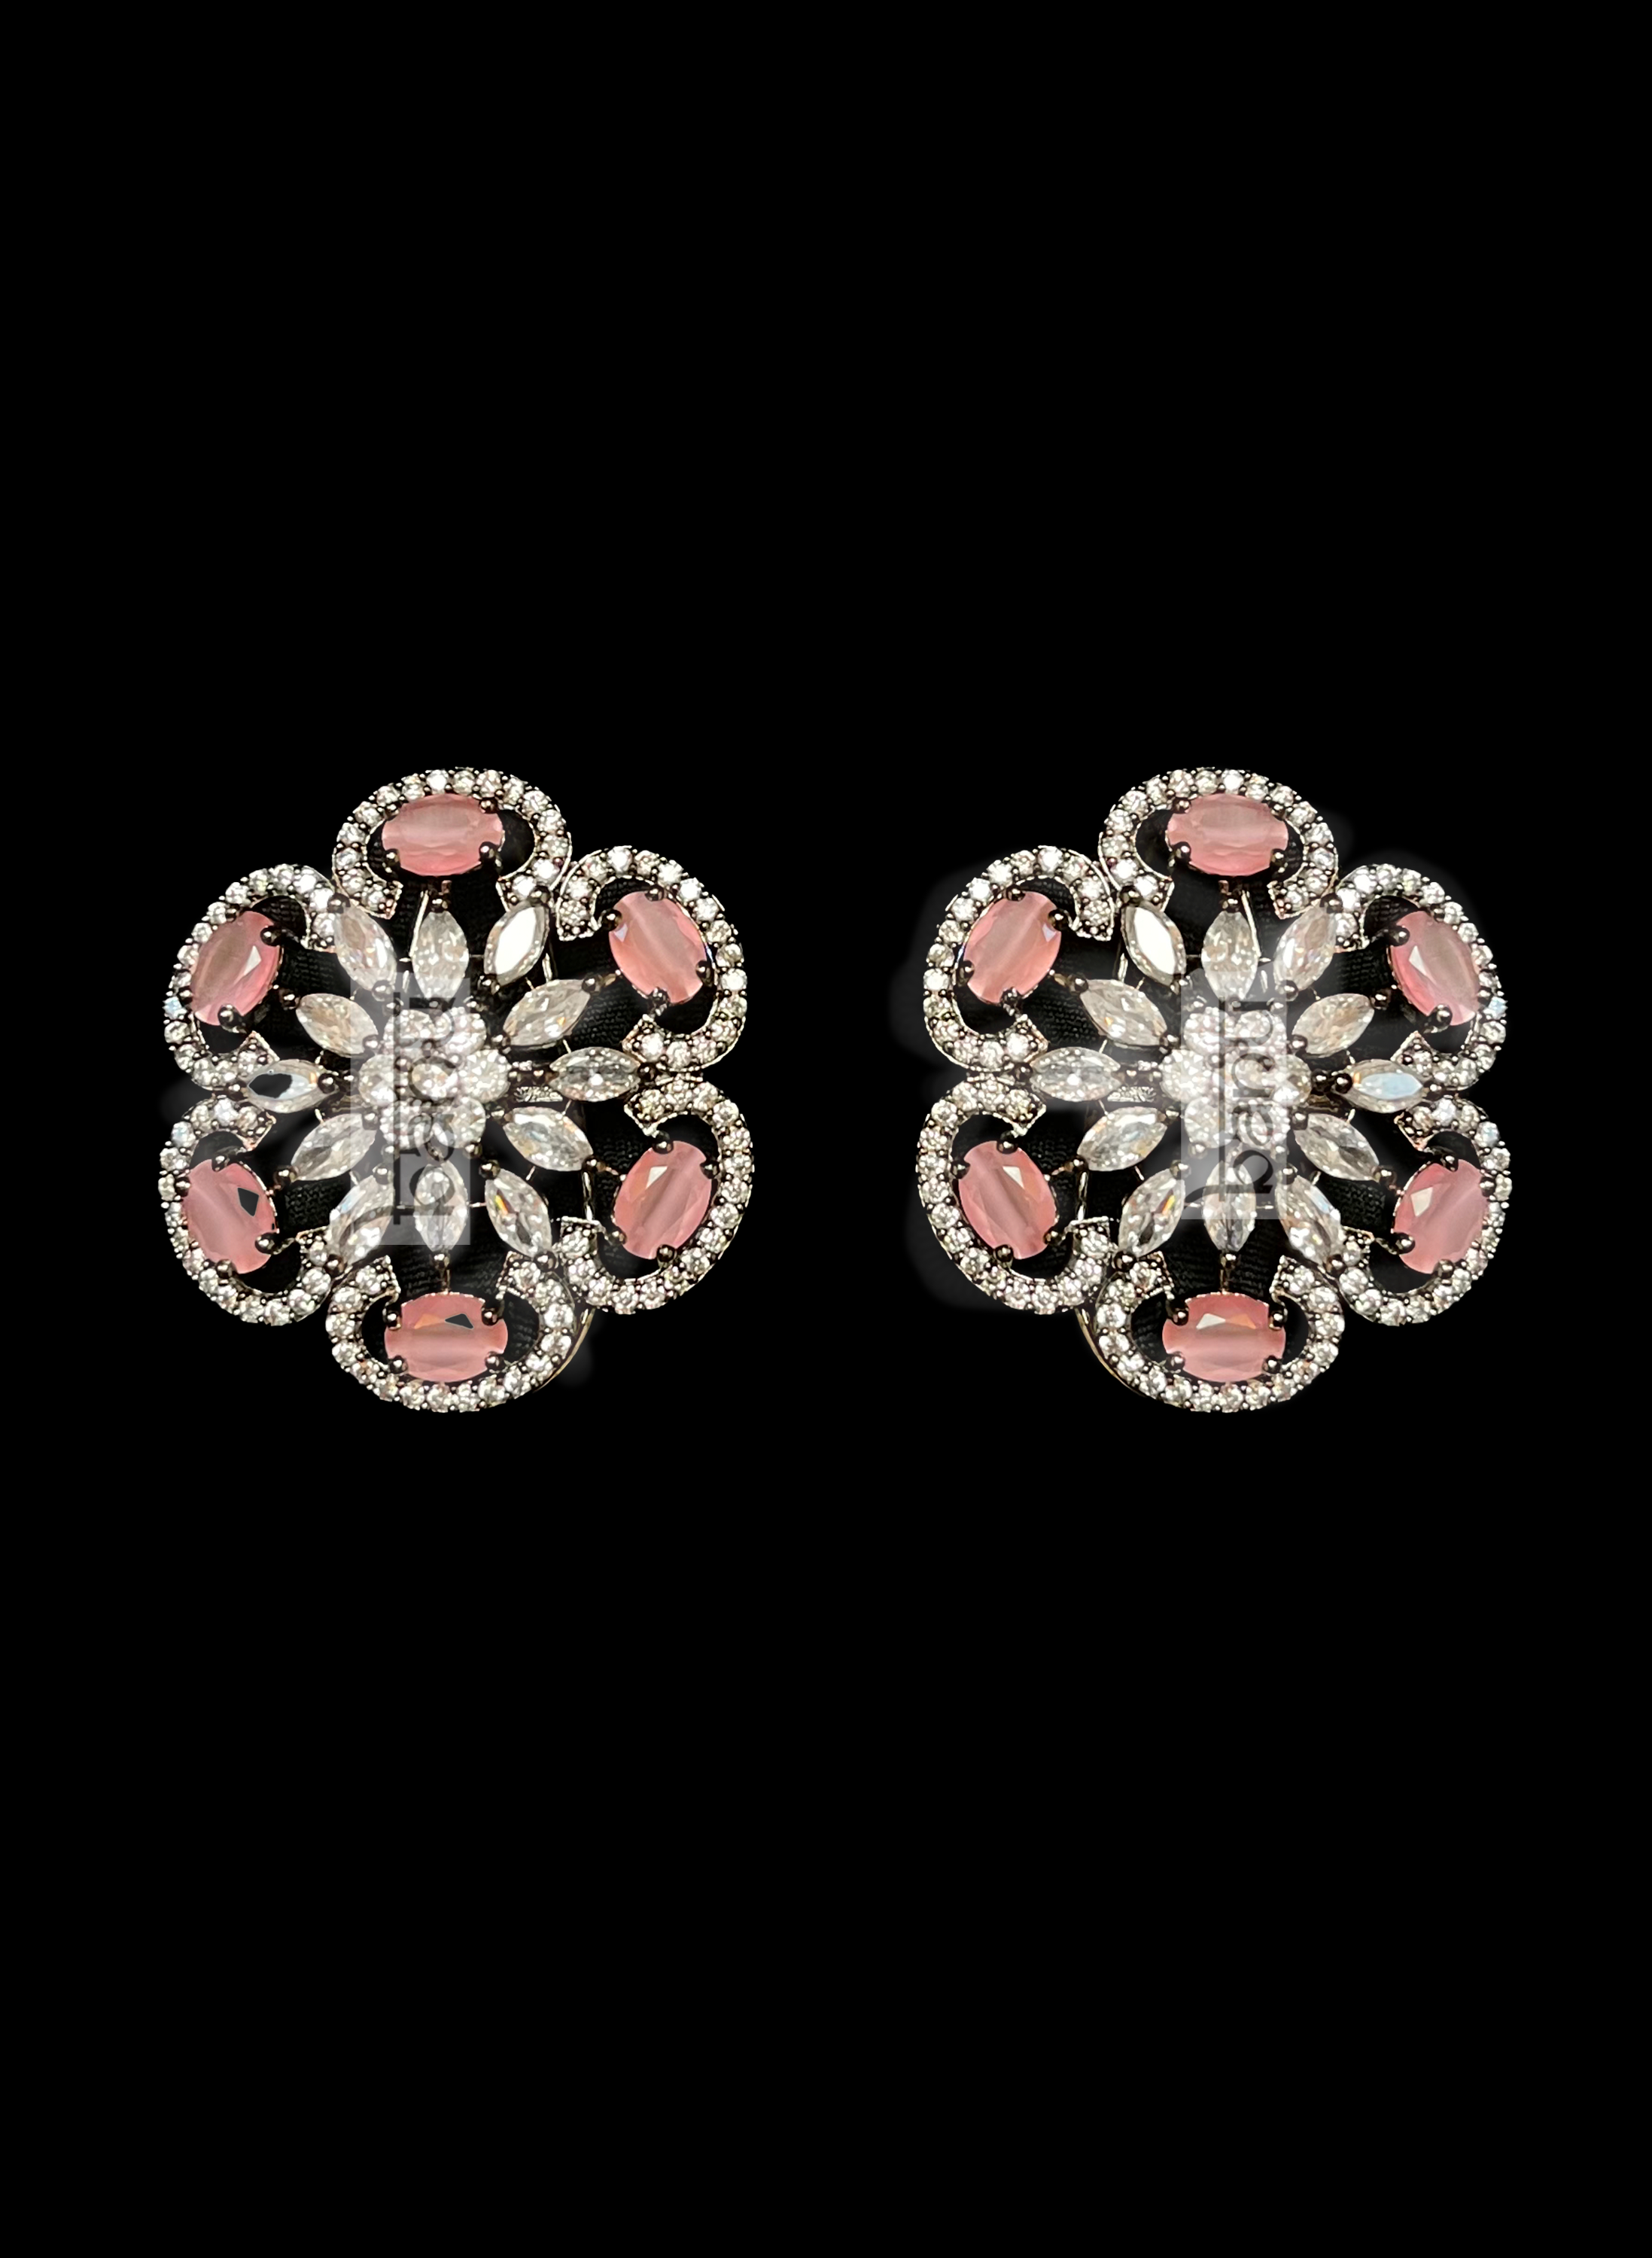 CZ stone studded earrings with pink onyx